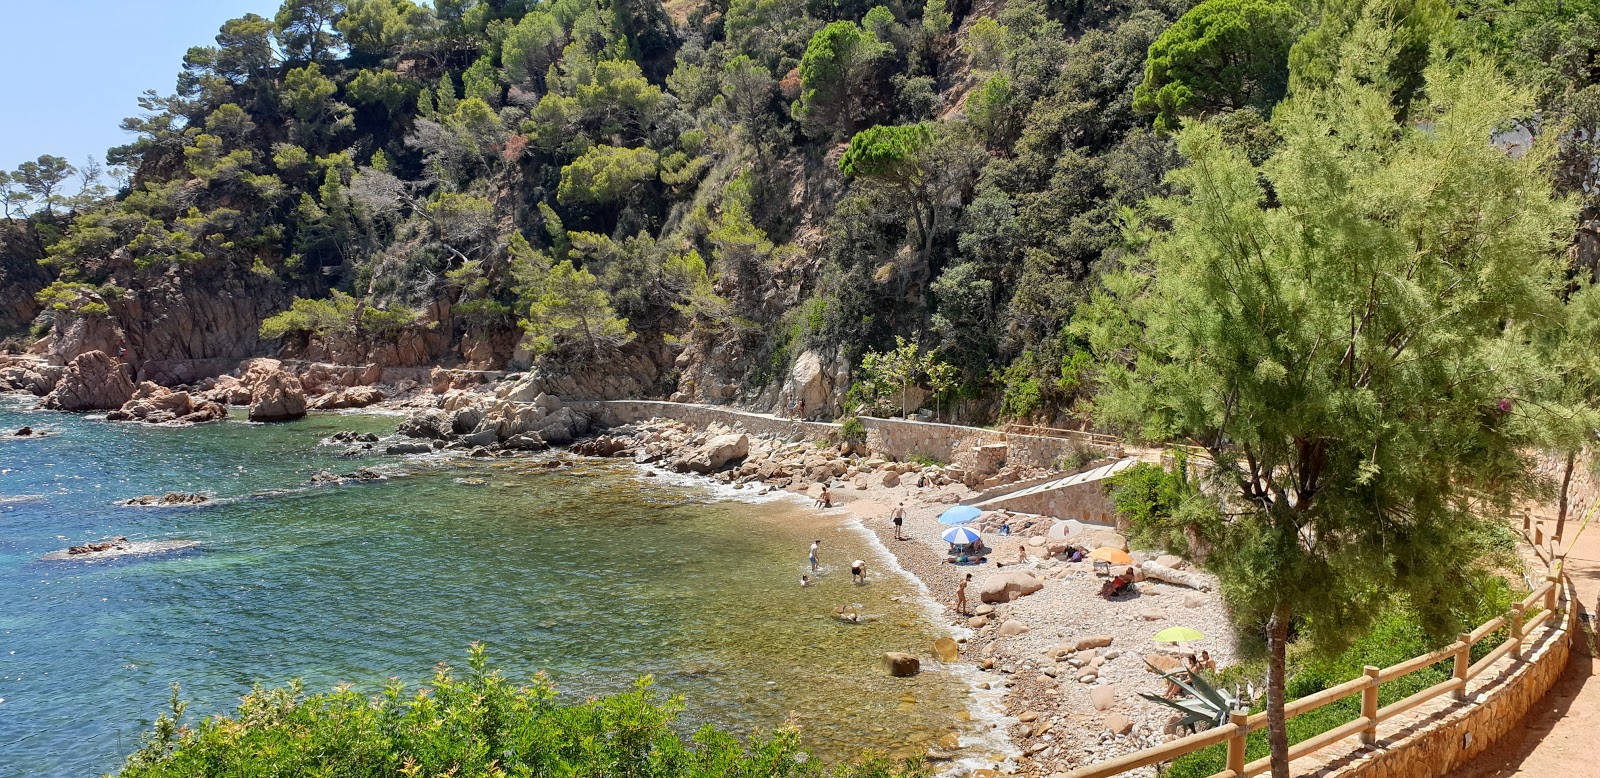 Photo of Platja dels Canyerets with small multi bays